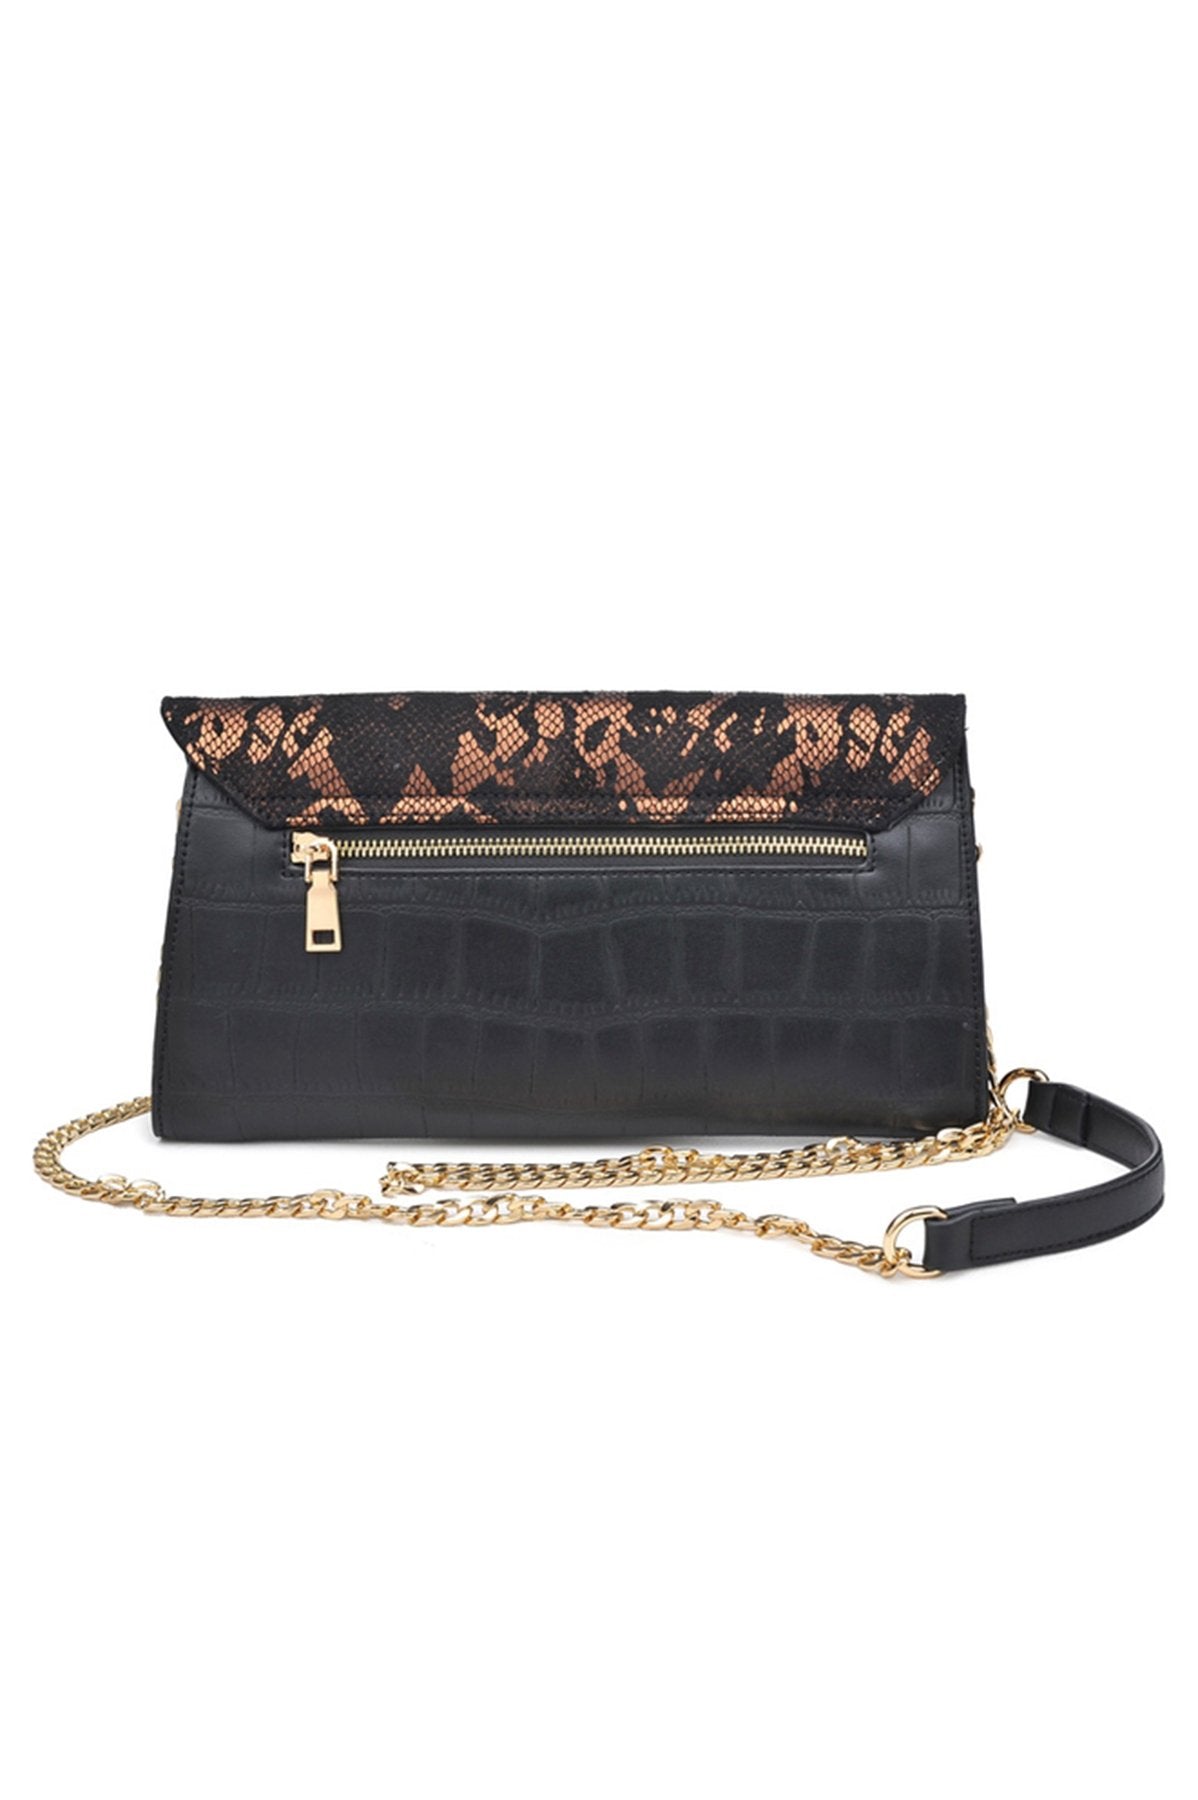 VERONICA EMBOSSED FOLDOVER CROSSBODY CLUTCH BAG URBAN EXPRESSIONS 